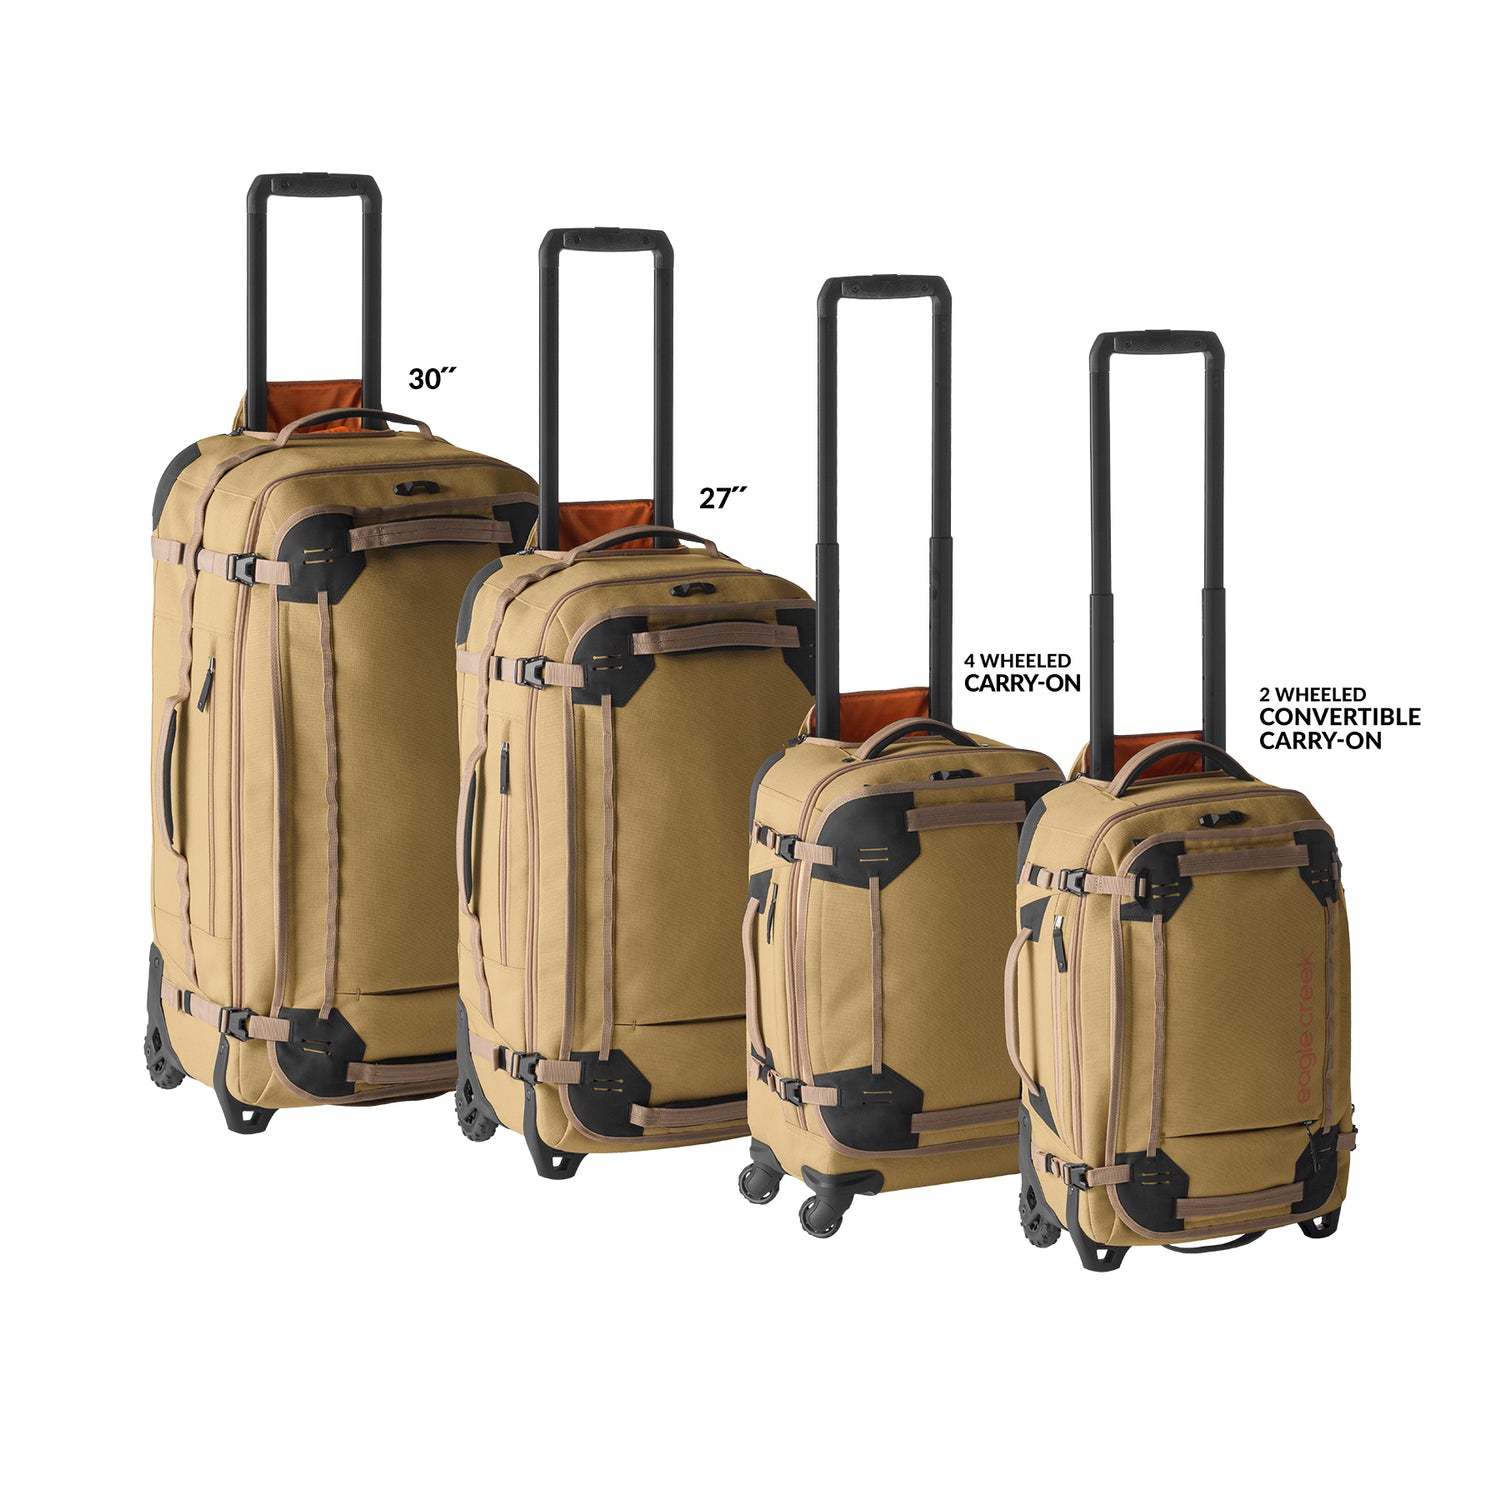 Eagle Creek Gear Review: Transformational luggage – The Denver Post